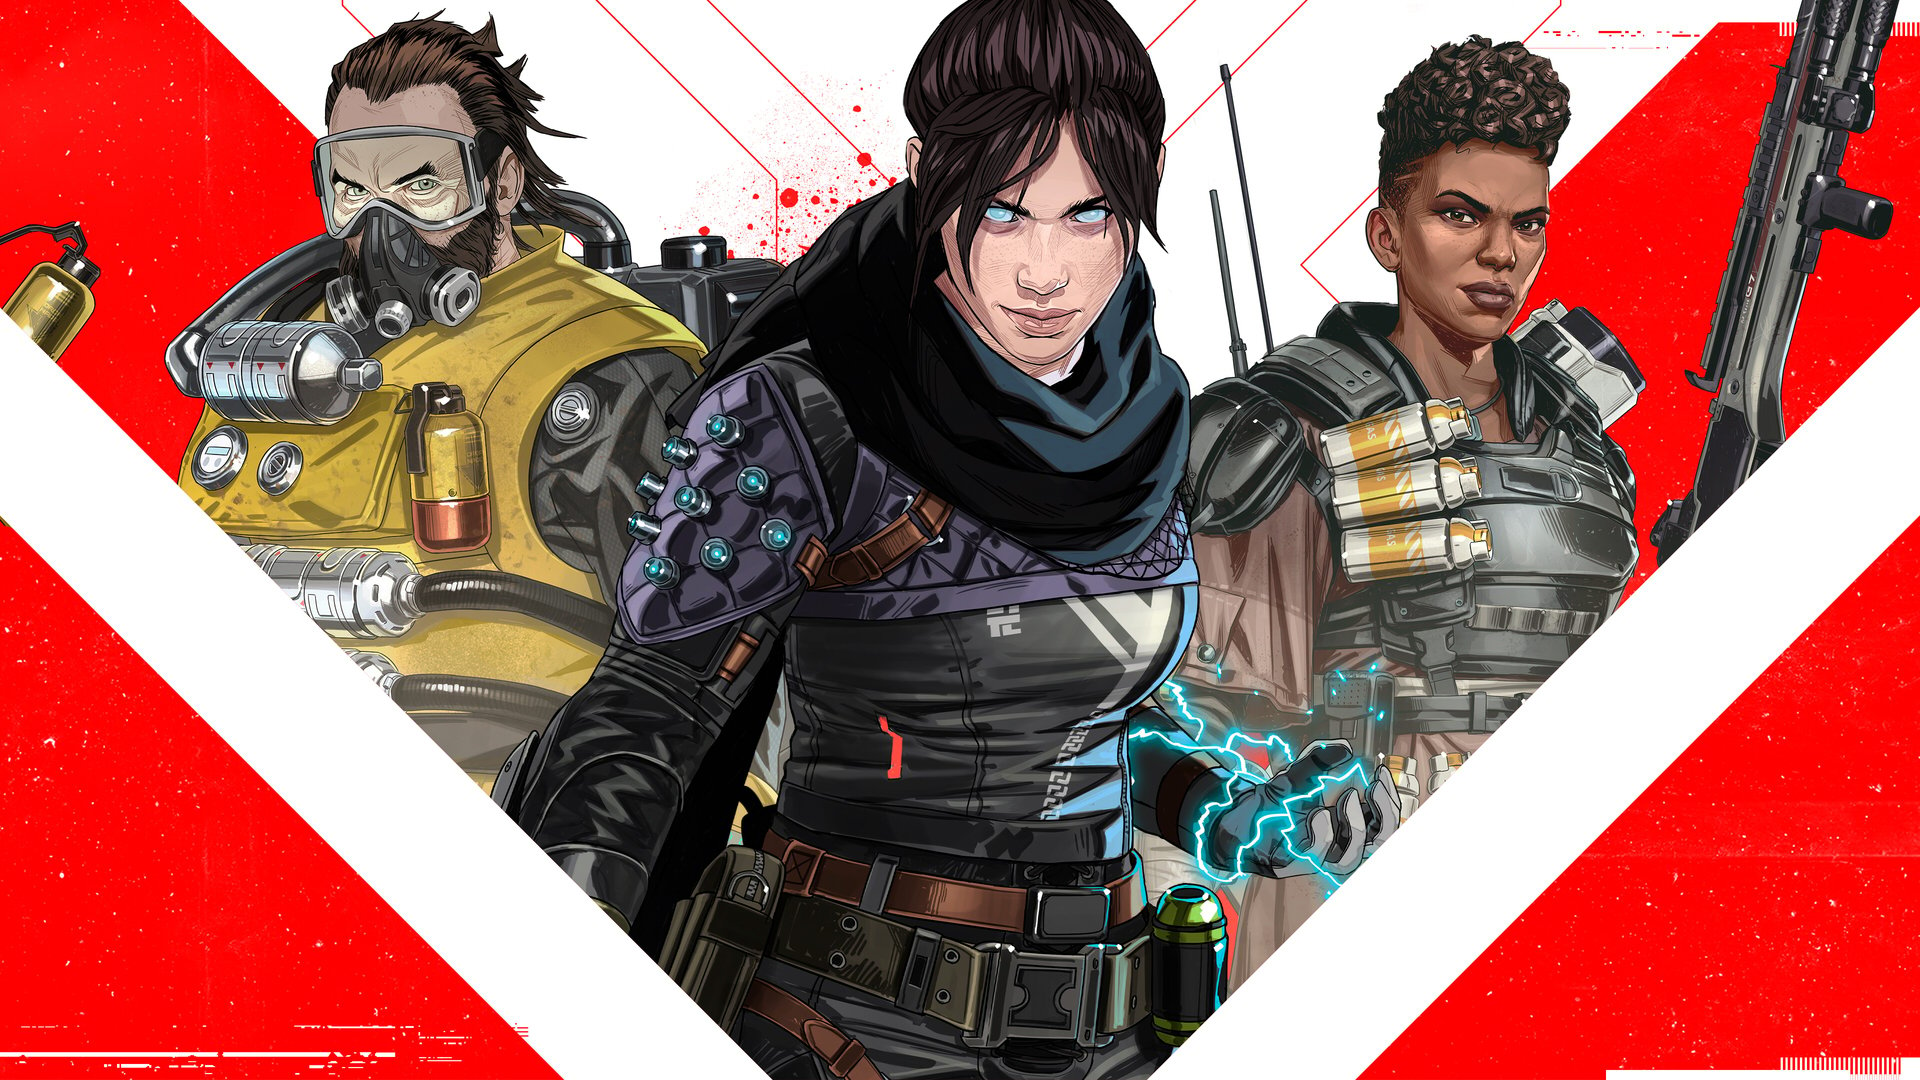 Caustic, Wraith, and Bangalore pose in Apex Mobile's key art.